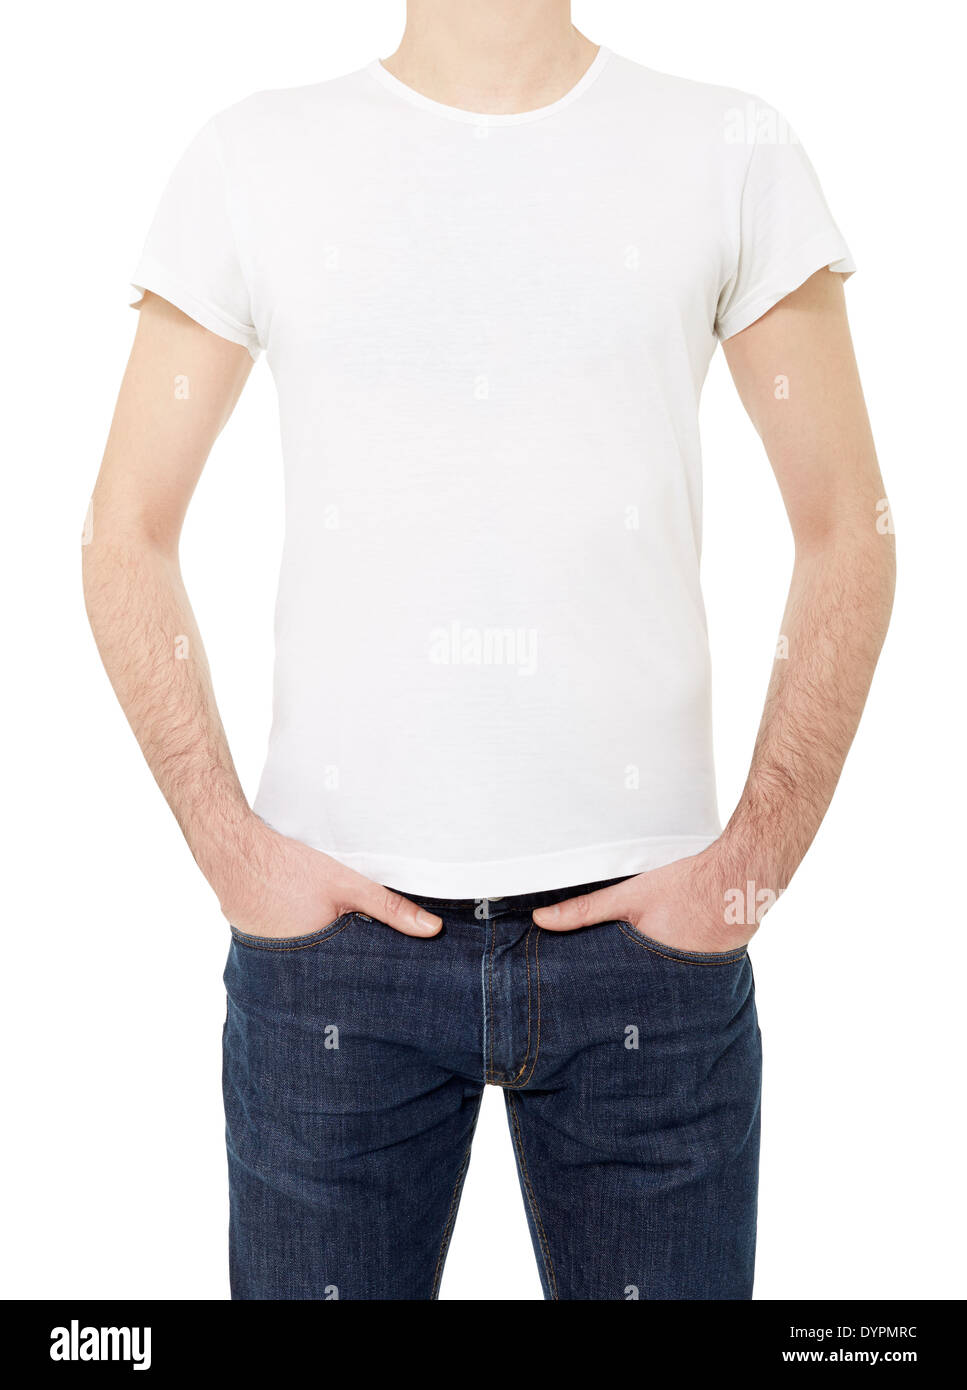 Man wearing white t-shirt with hands in pockets Stock Photo